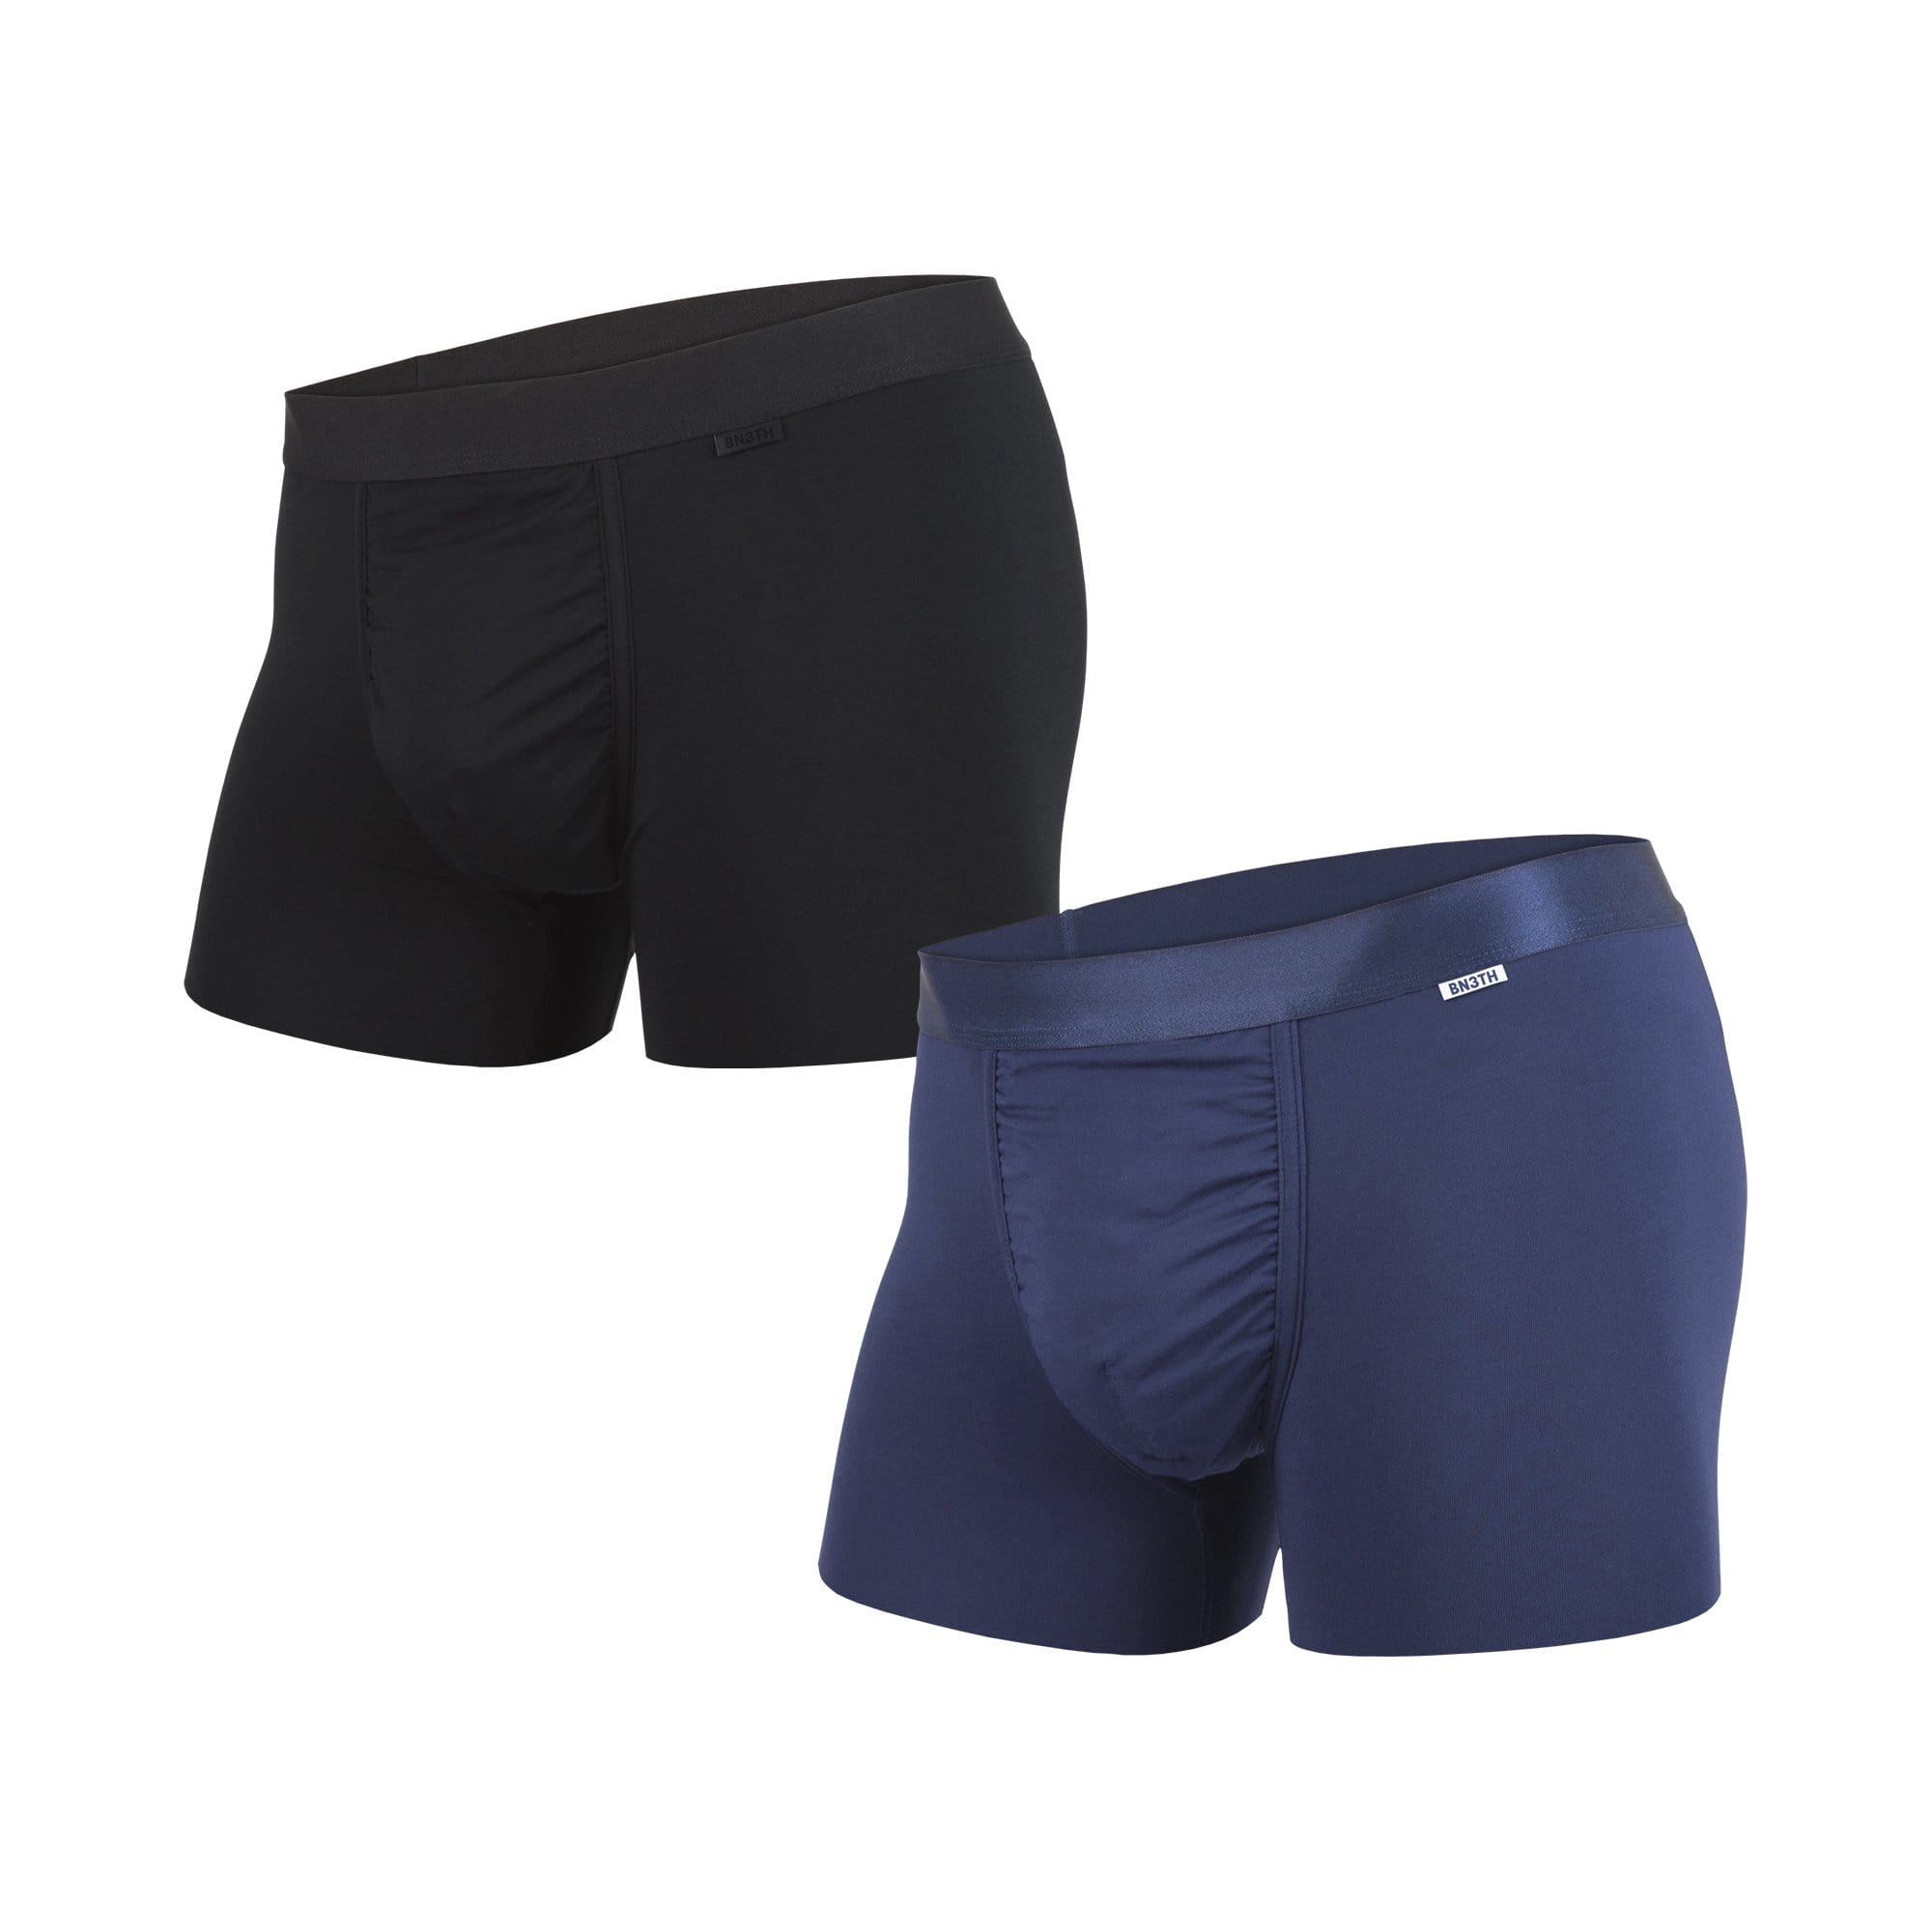 Men's Ball Supporting Trunks/Hipsters, 2-Pack: Black/Navy